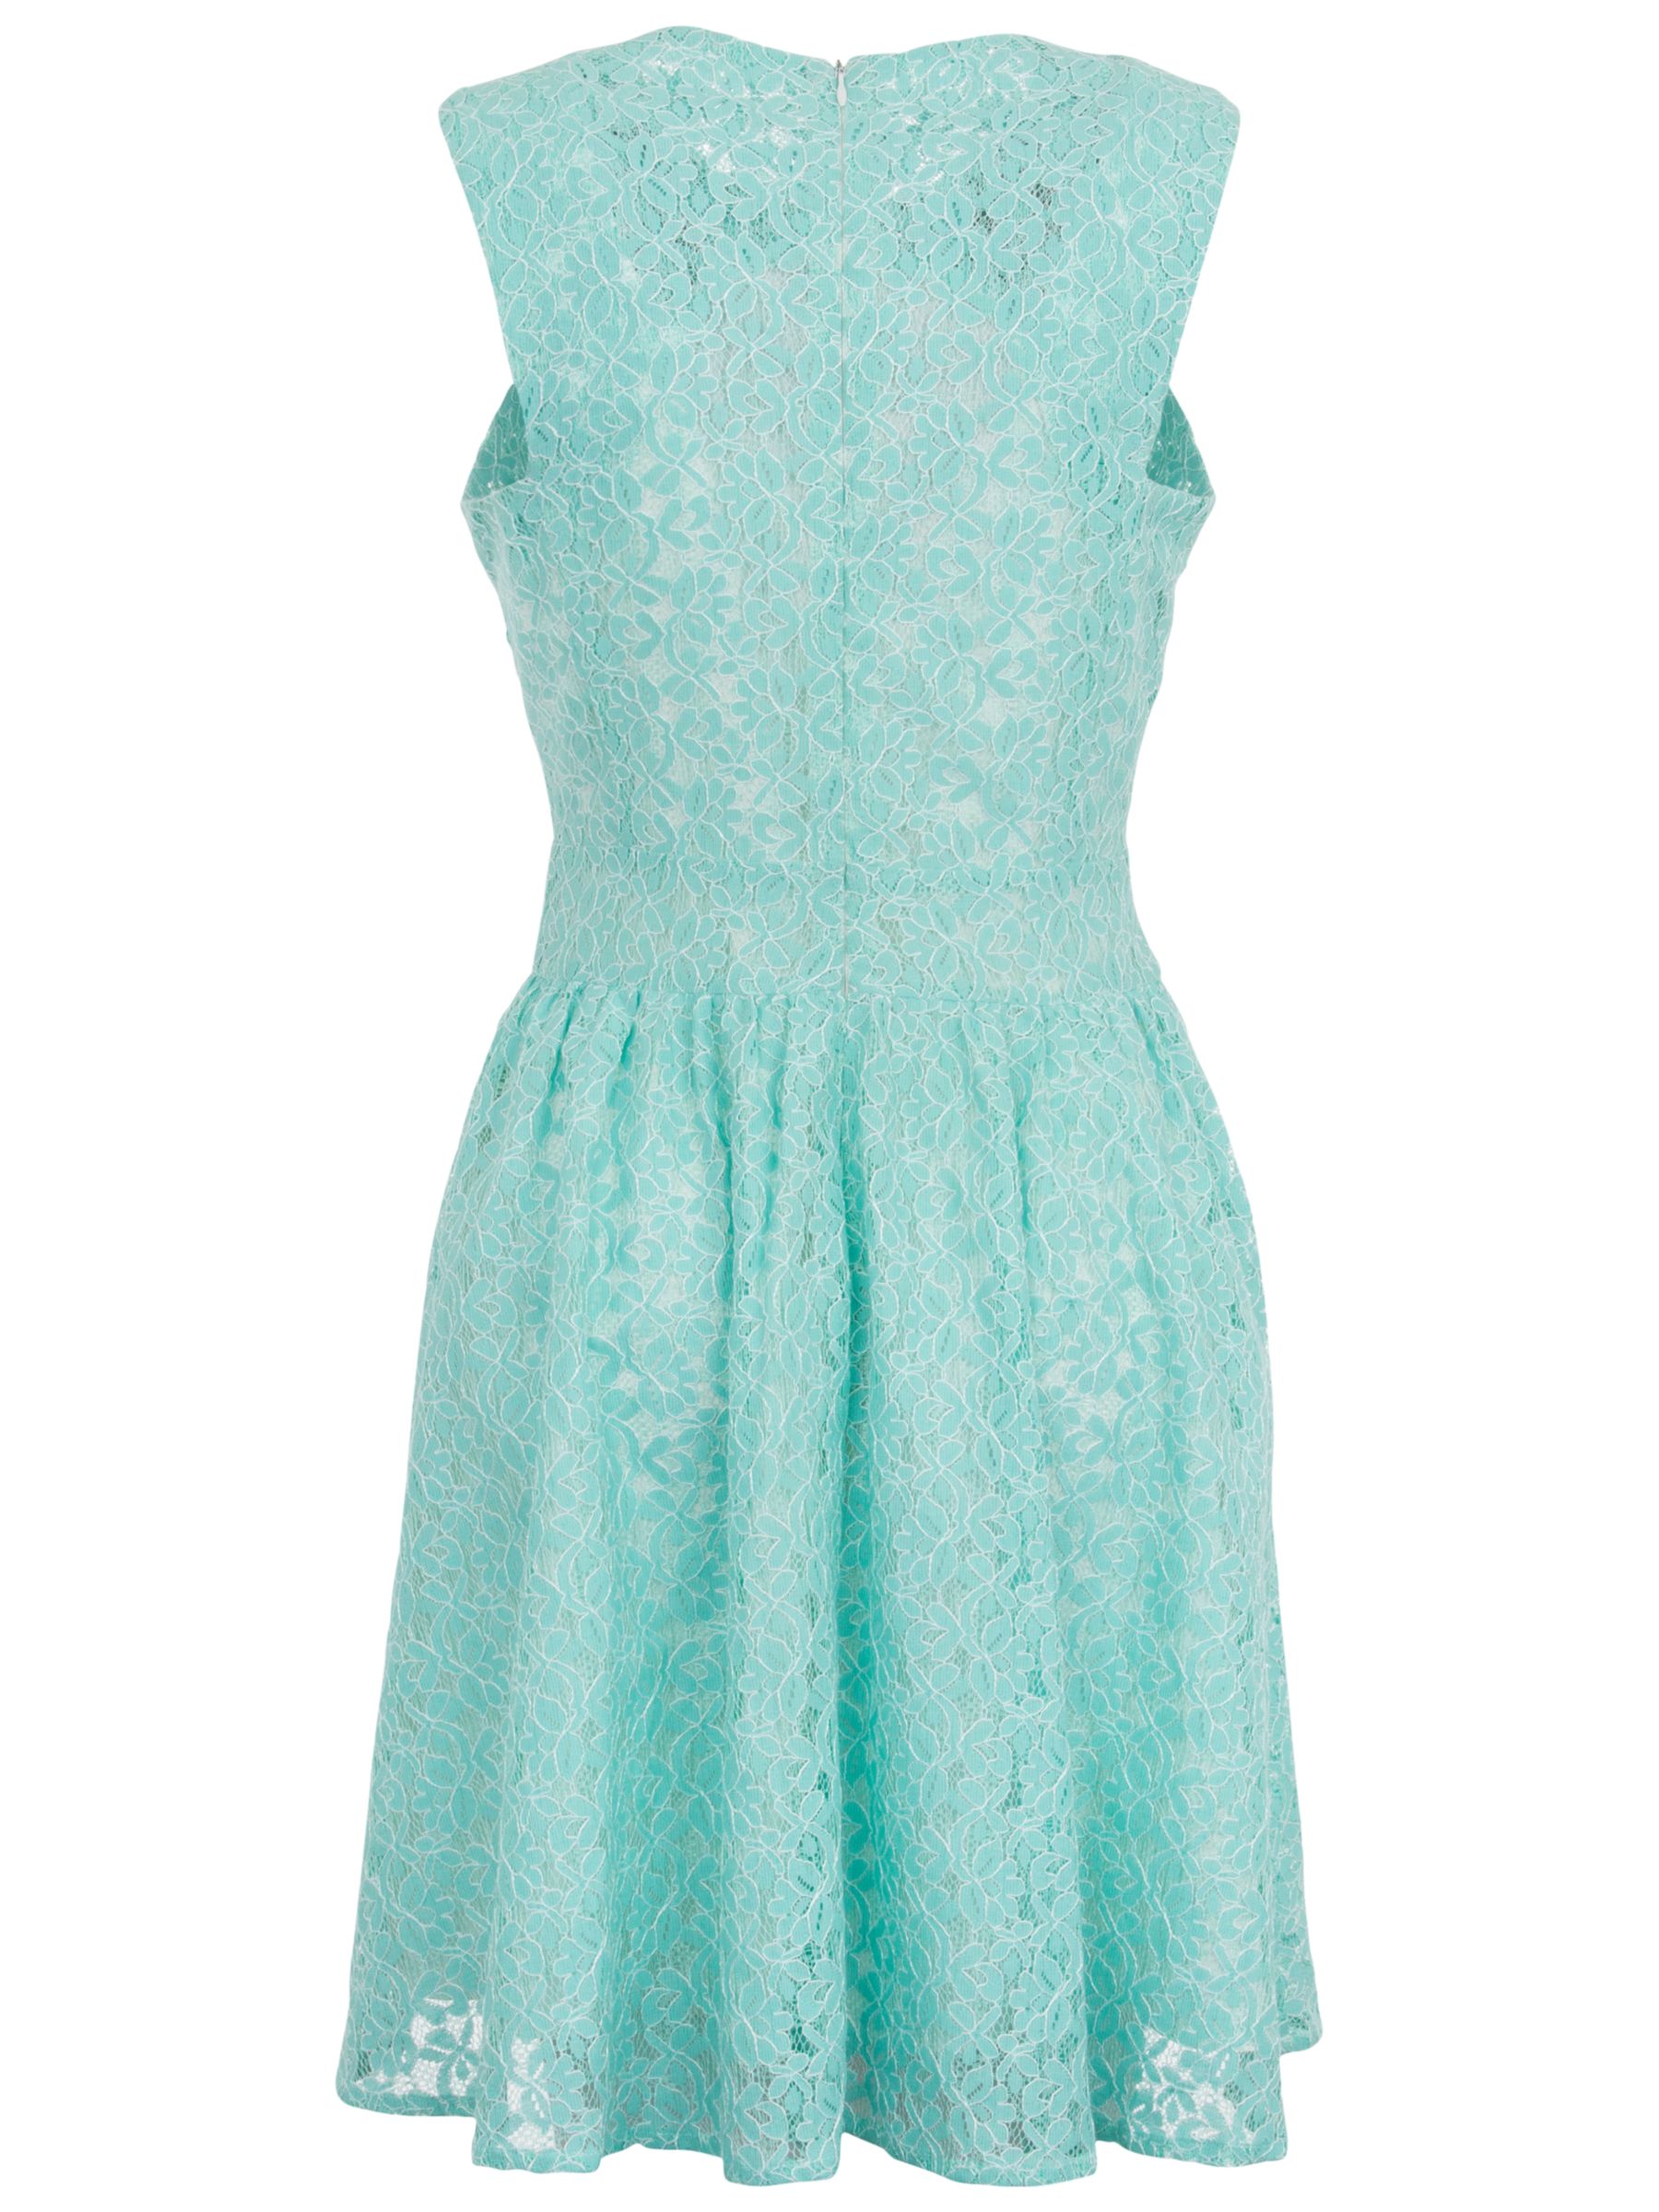 Wolf & Whistle Lace Prom Dress, Blue at John Lewis & Partners